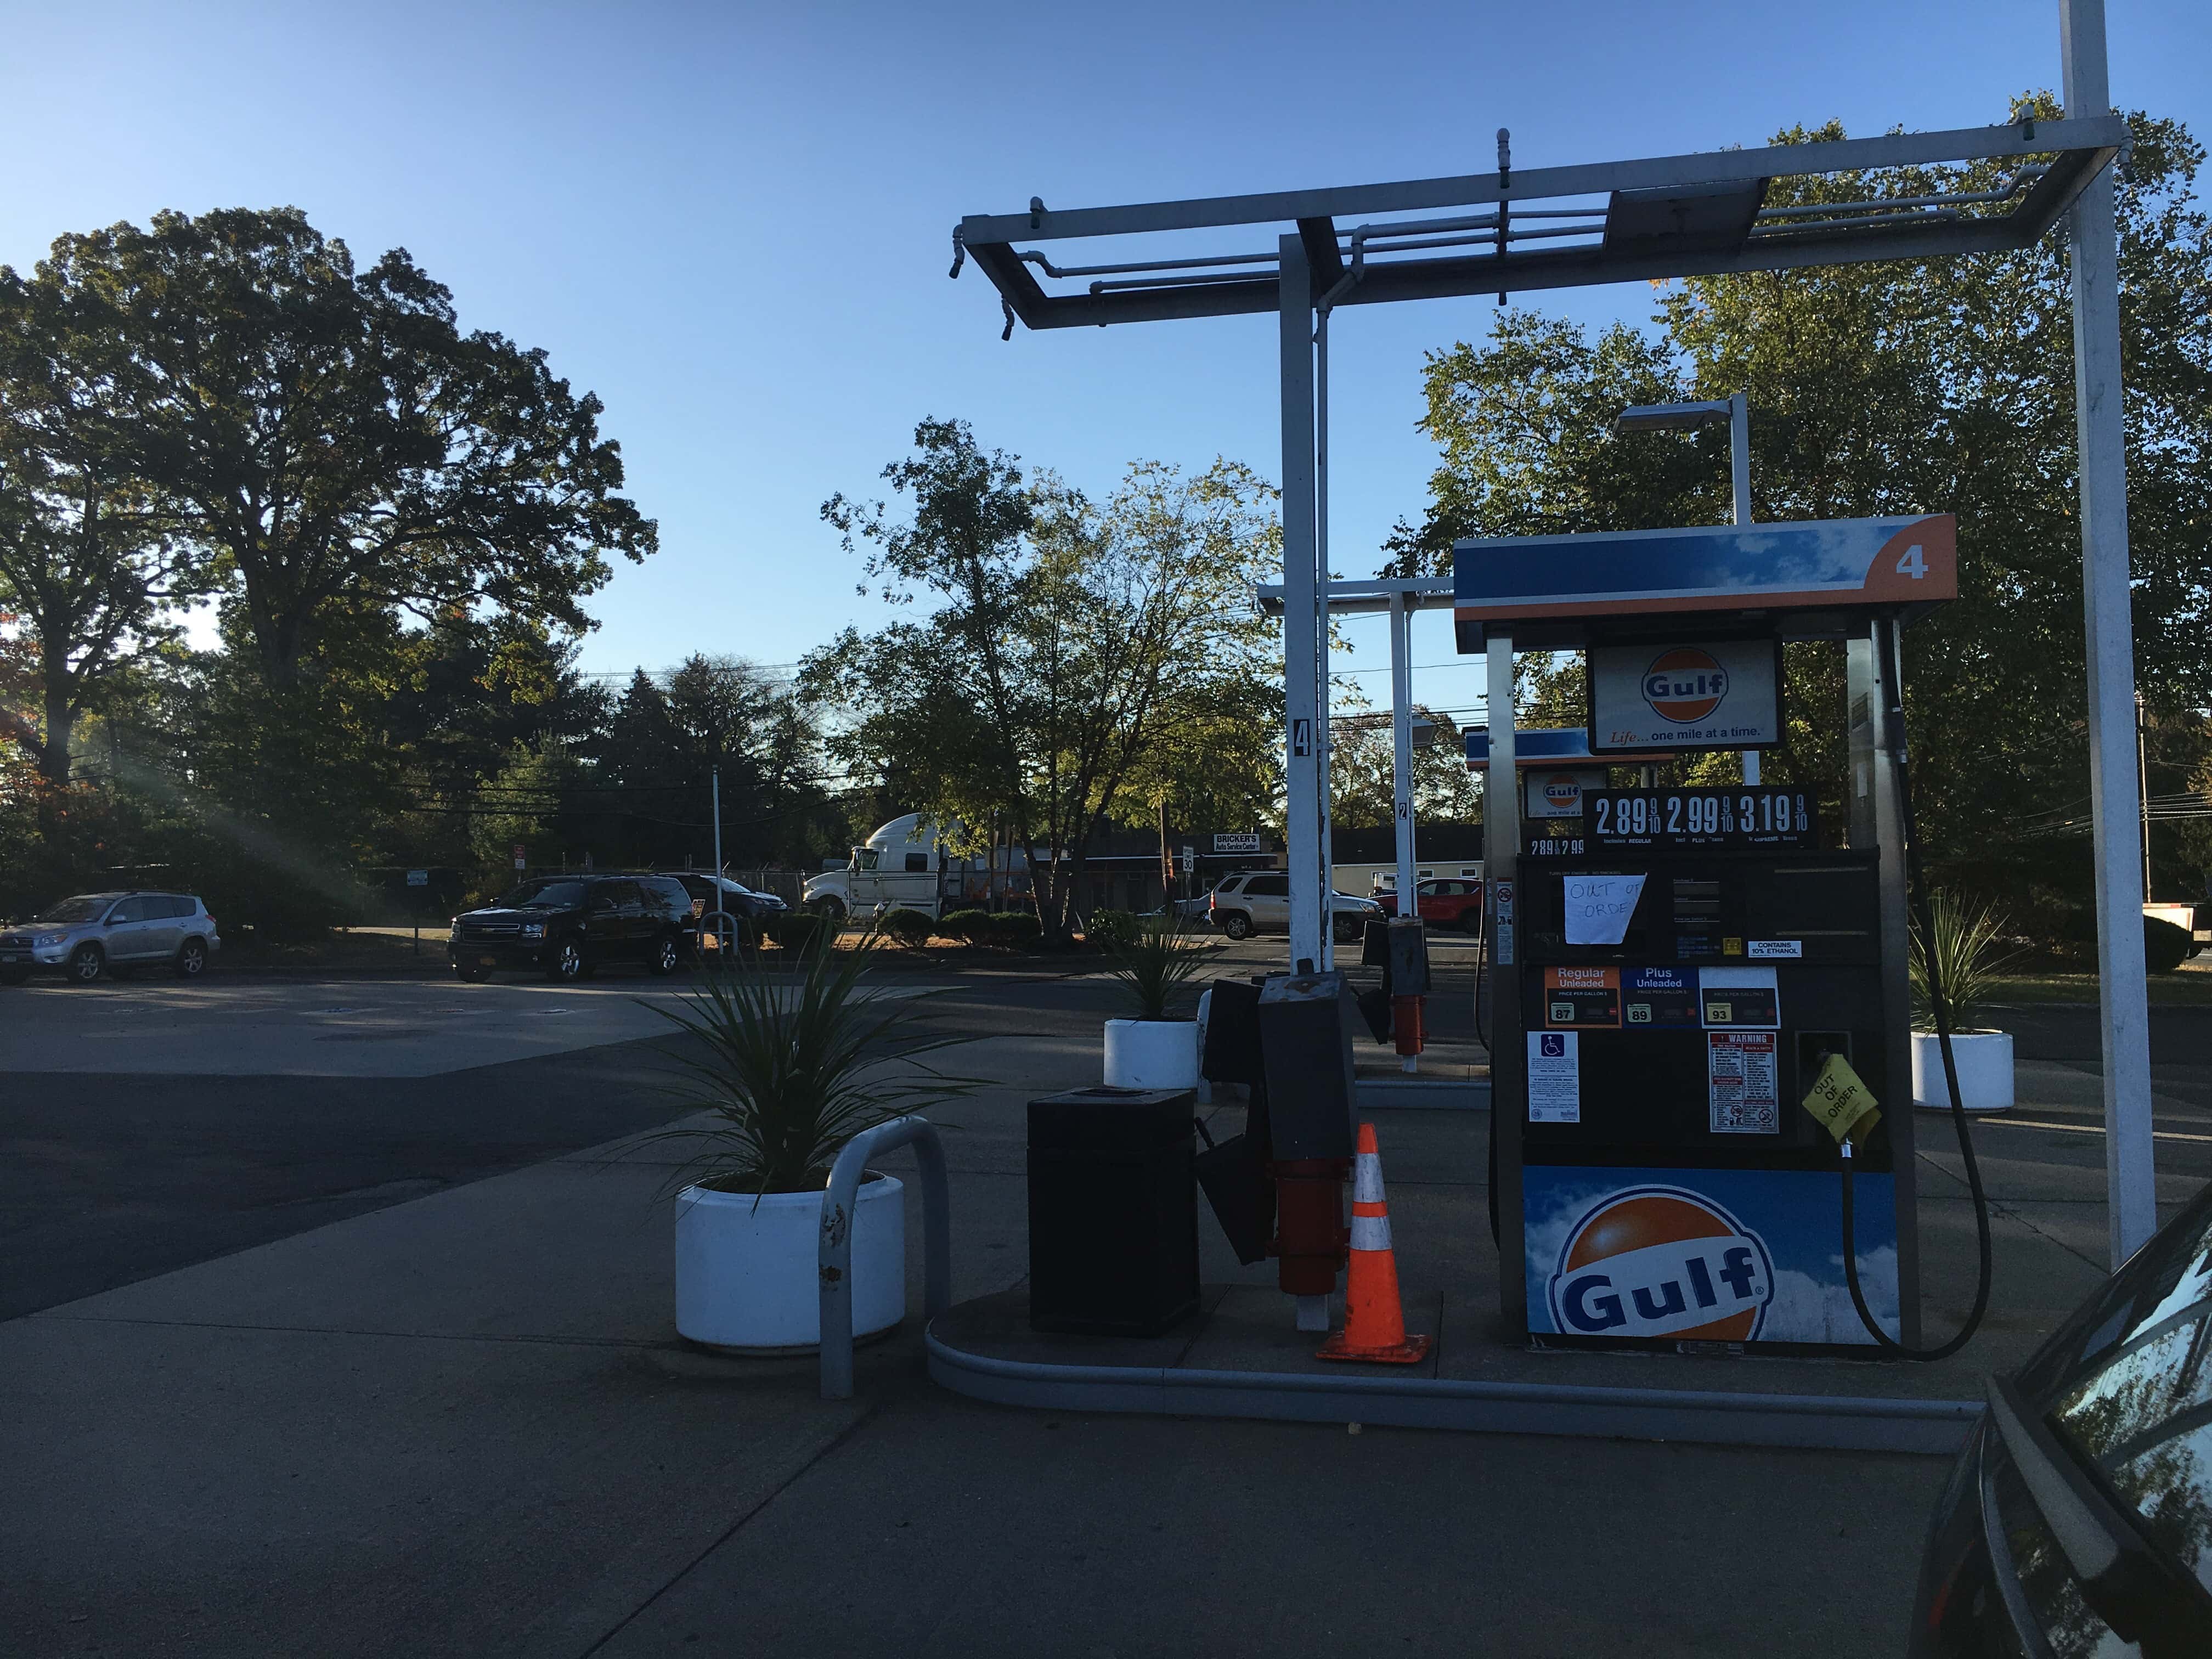 Gulf Express / Rockland Car Care - Pearl River, NY, US, 24 hour gas